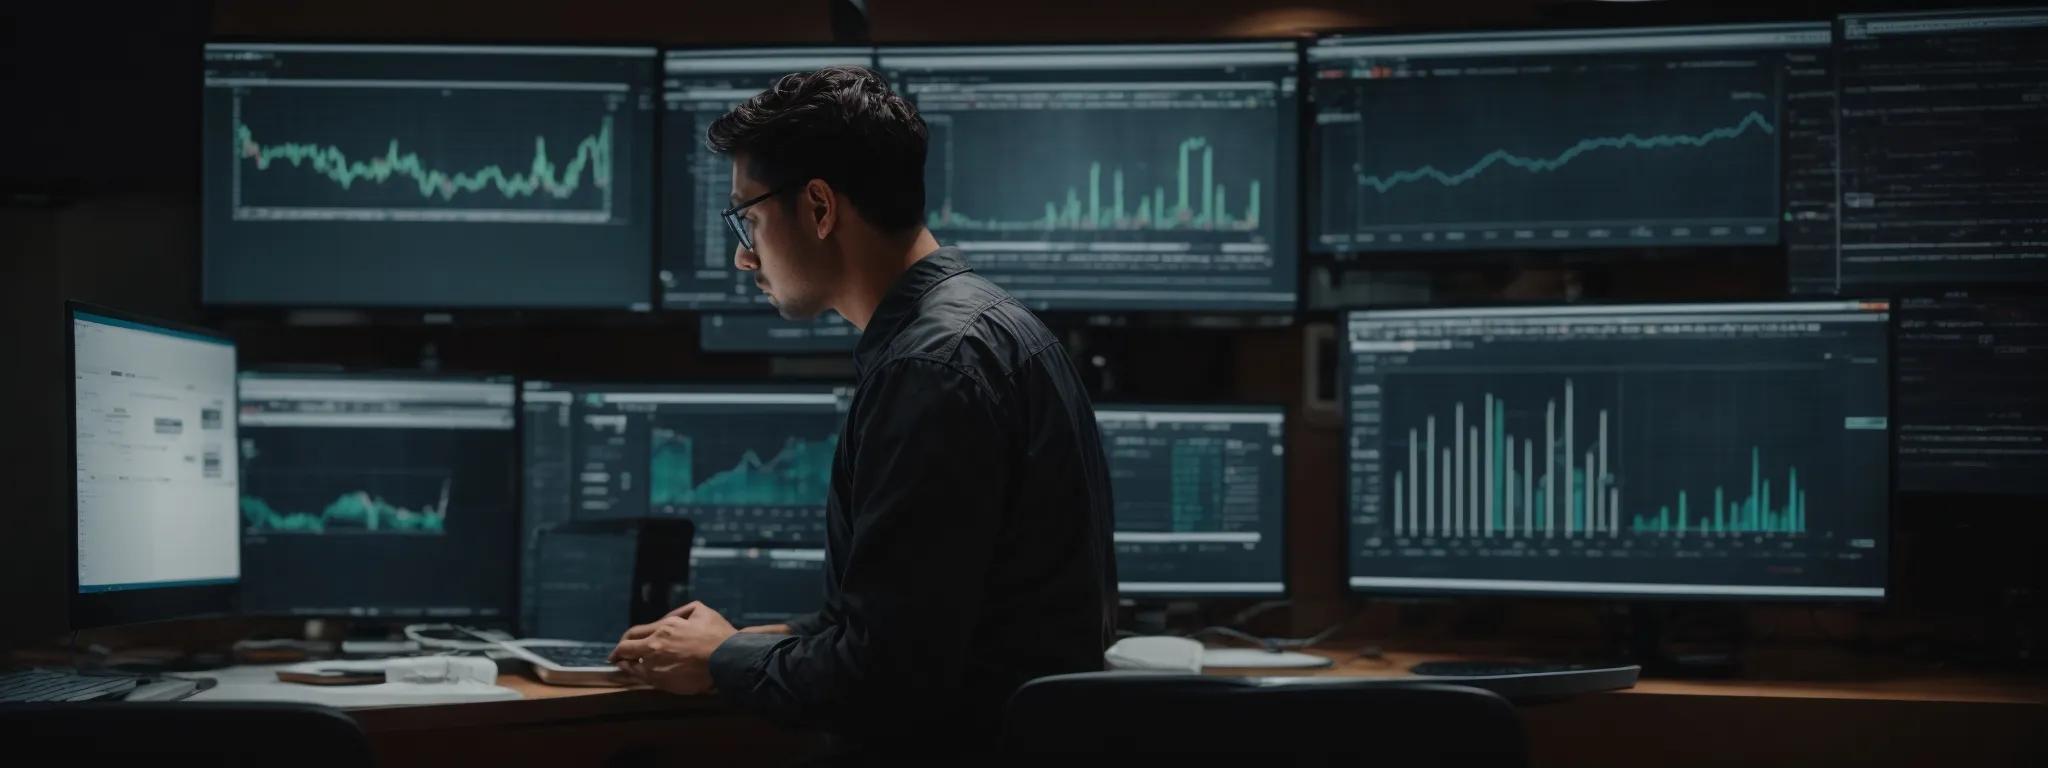 a digital strategist intently analyzes data on a computer screen filled with seo metrics and trend graphs.